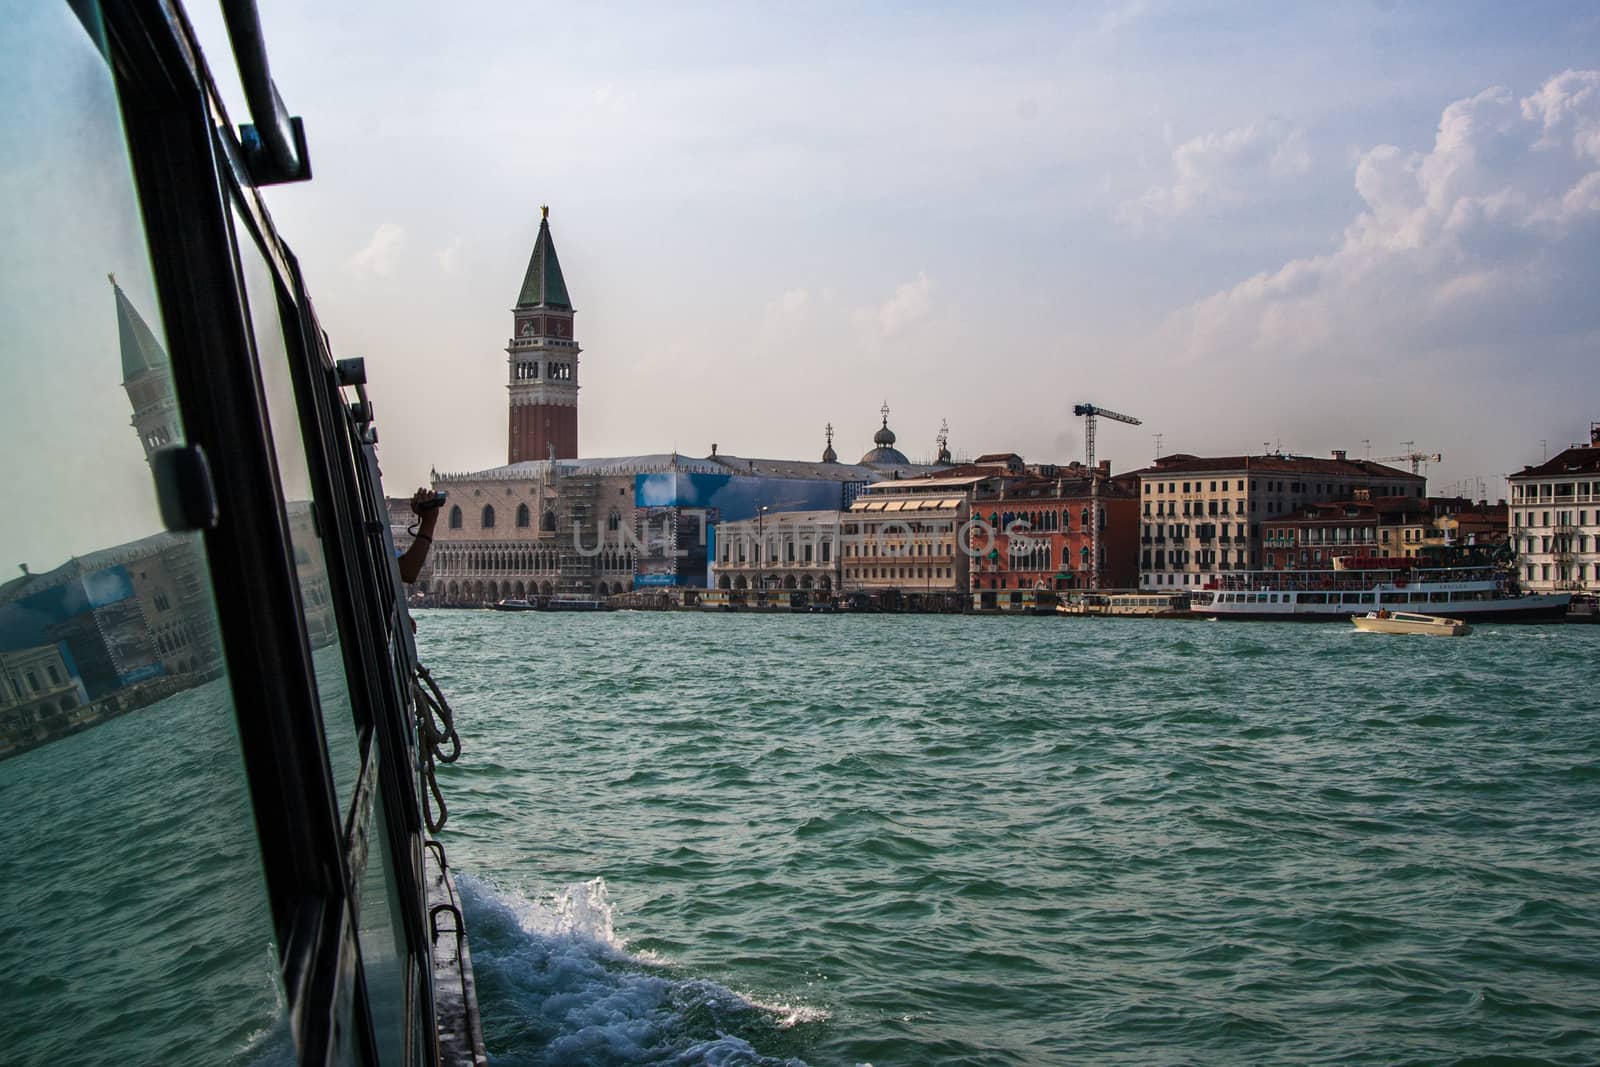 Arriving at San Marcos in Venice in a bright shiny day by tanaonte